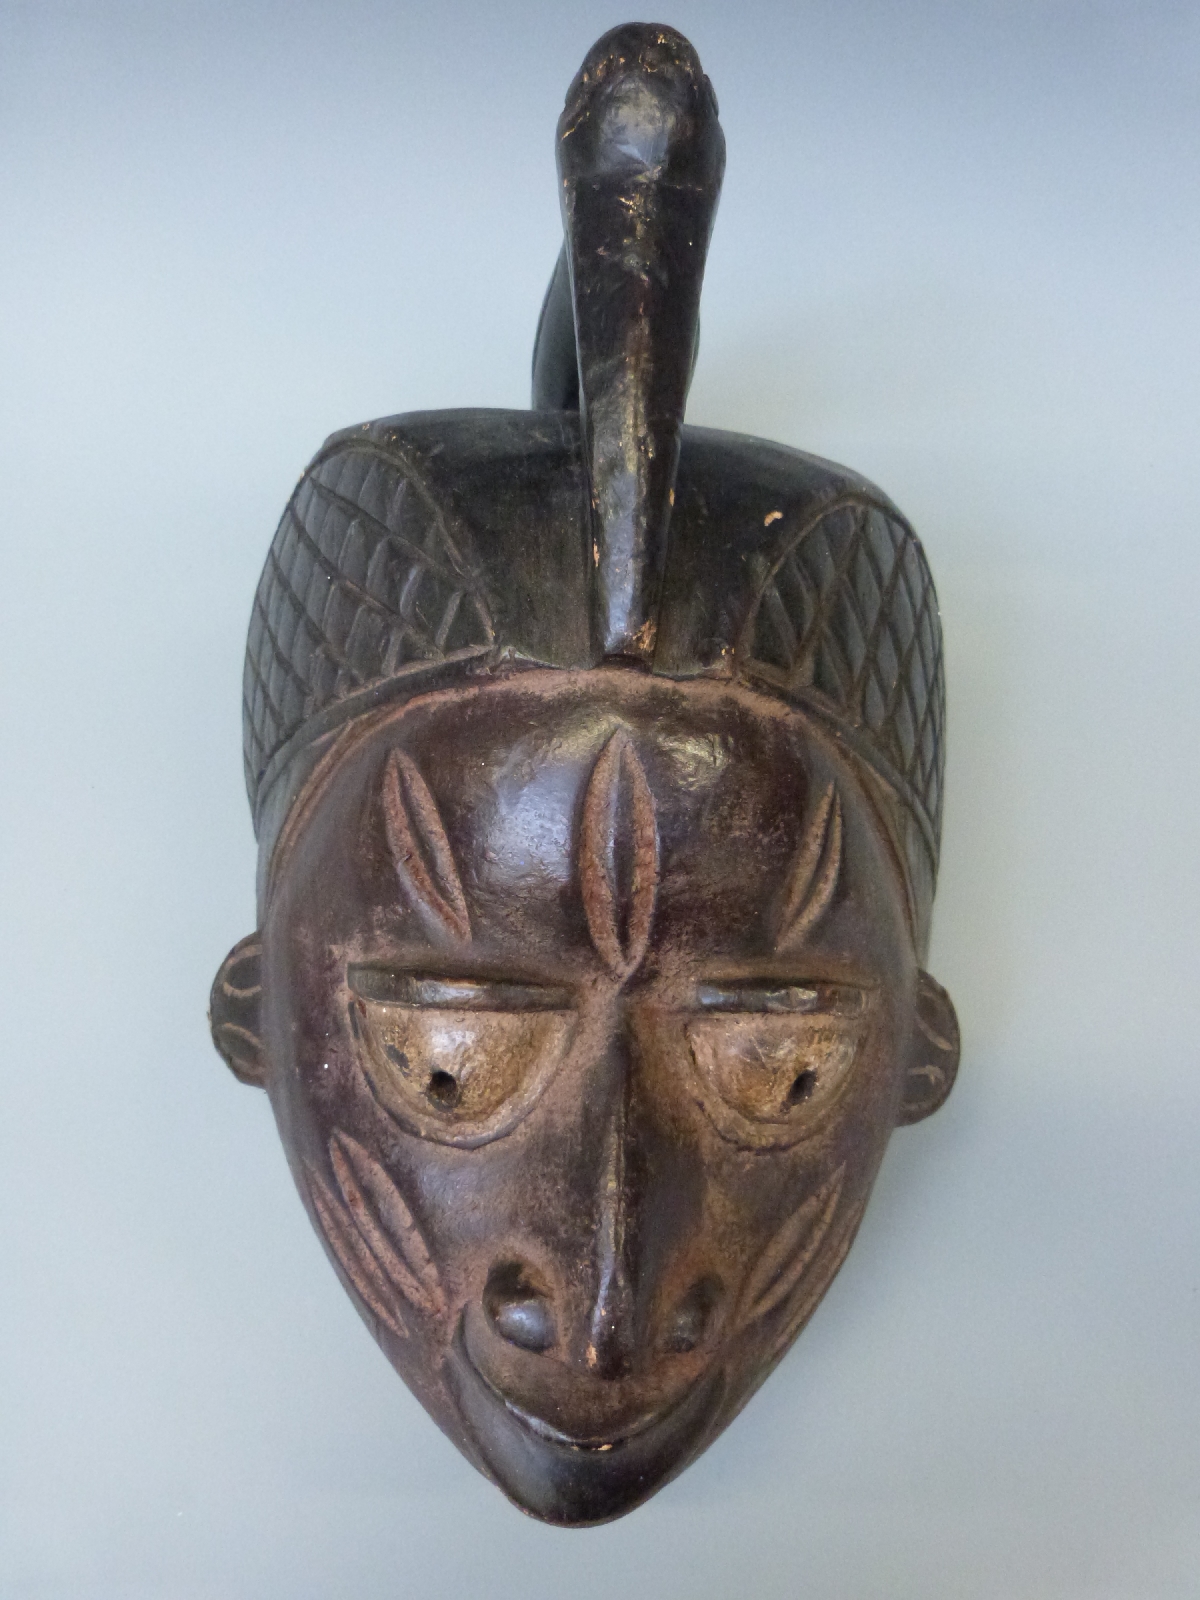 A tribal carved wooden mask decorated with a bird